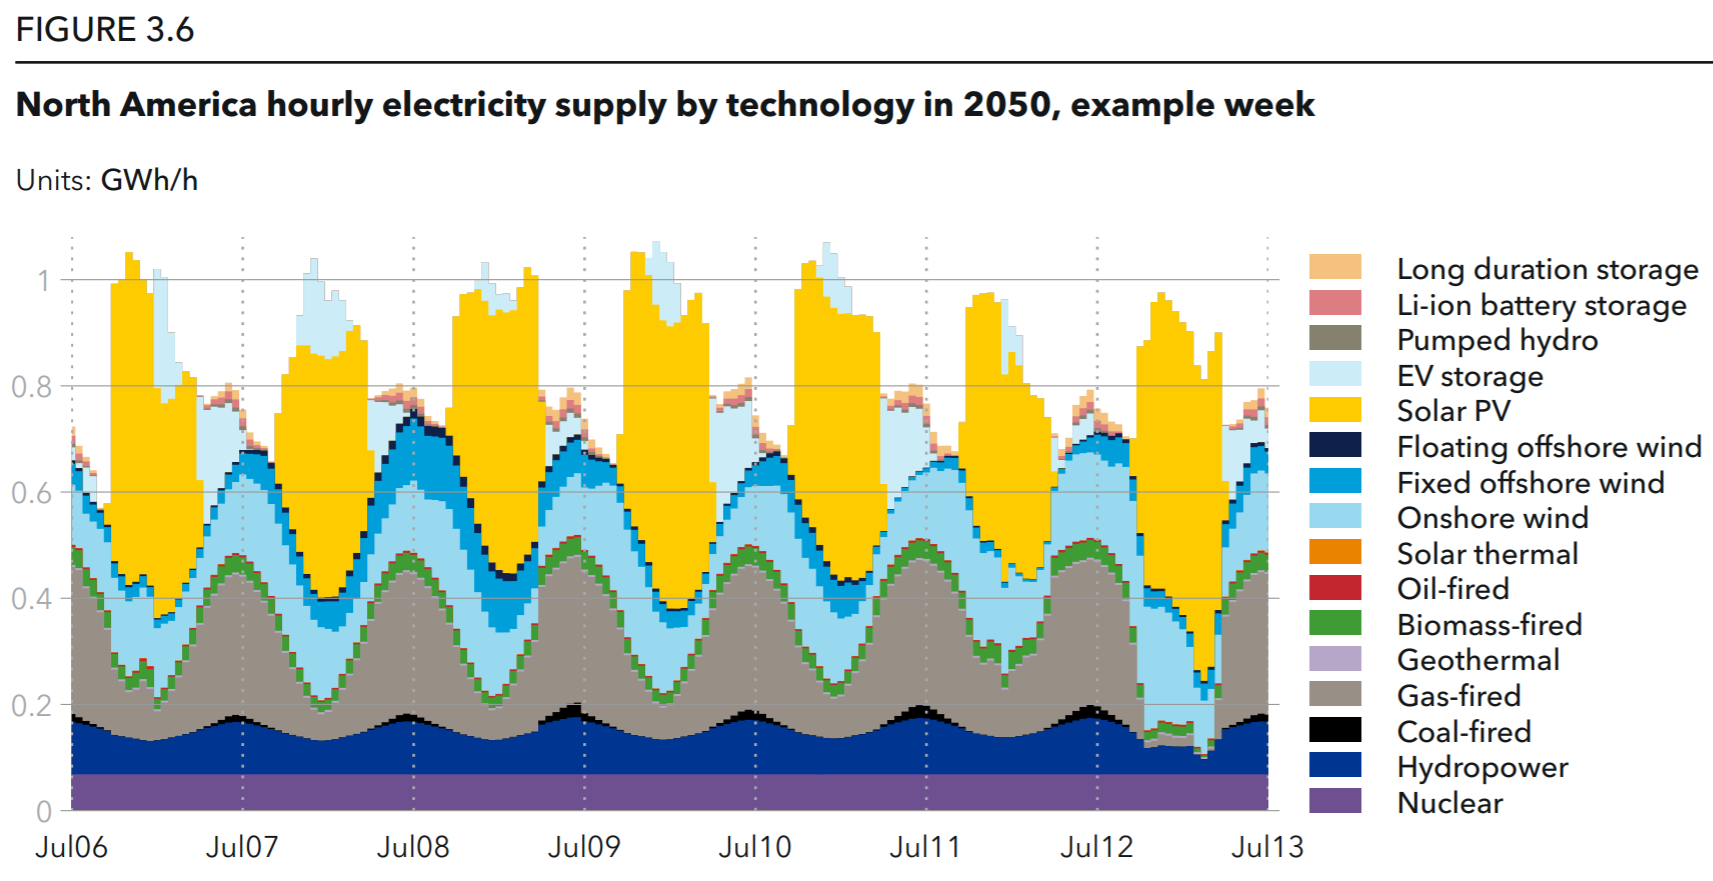 North America hourly electricity supply by technology in 2050